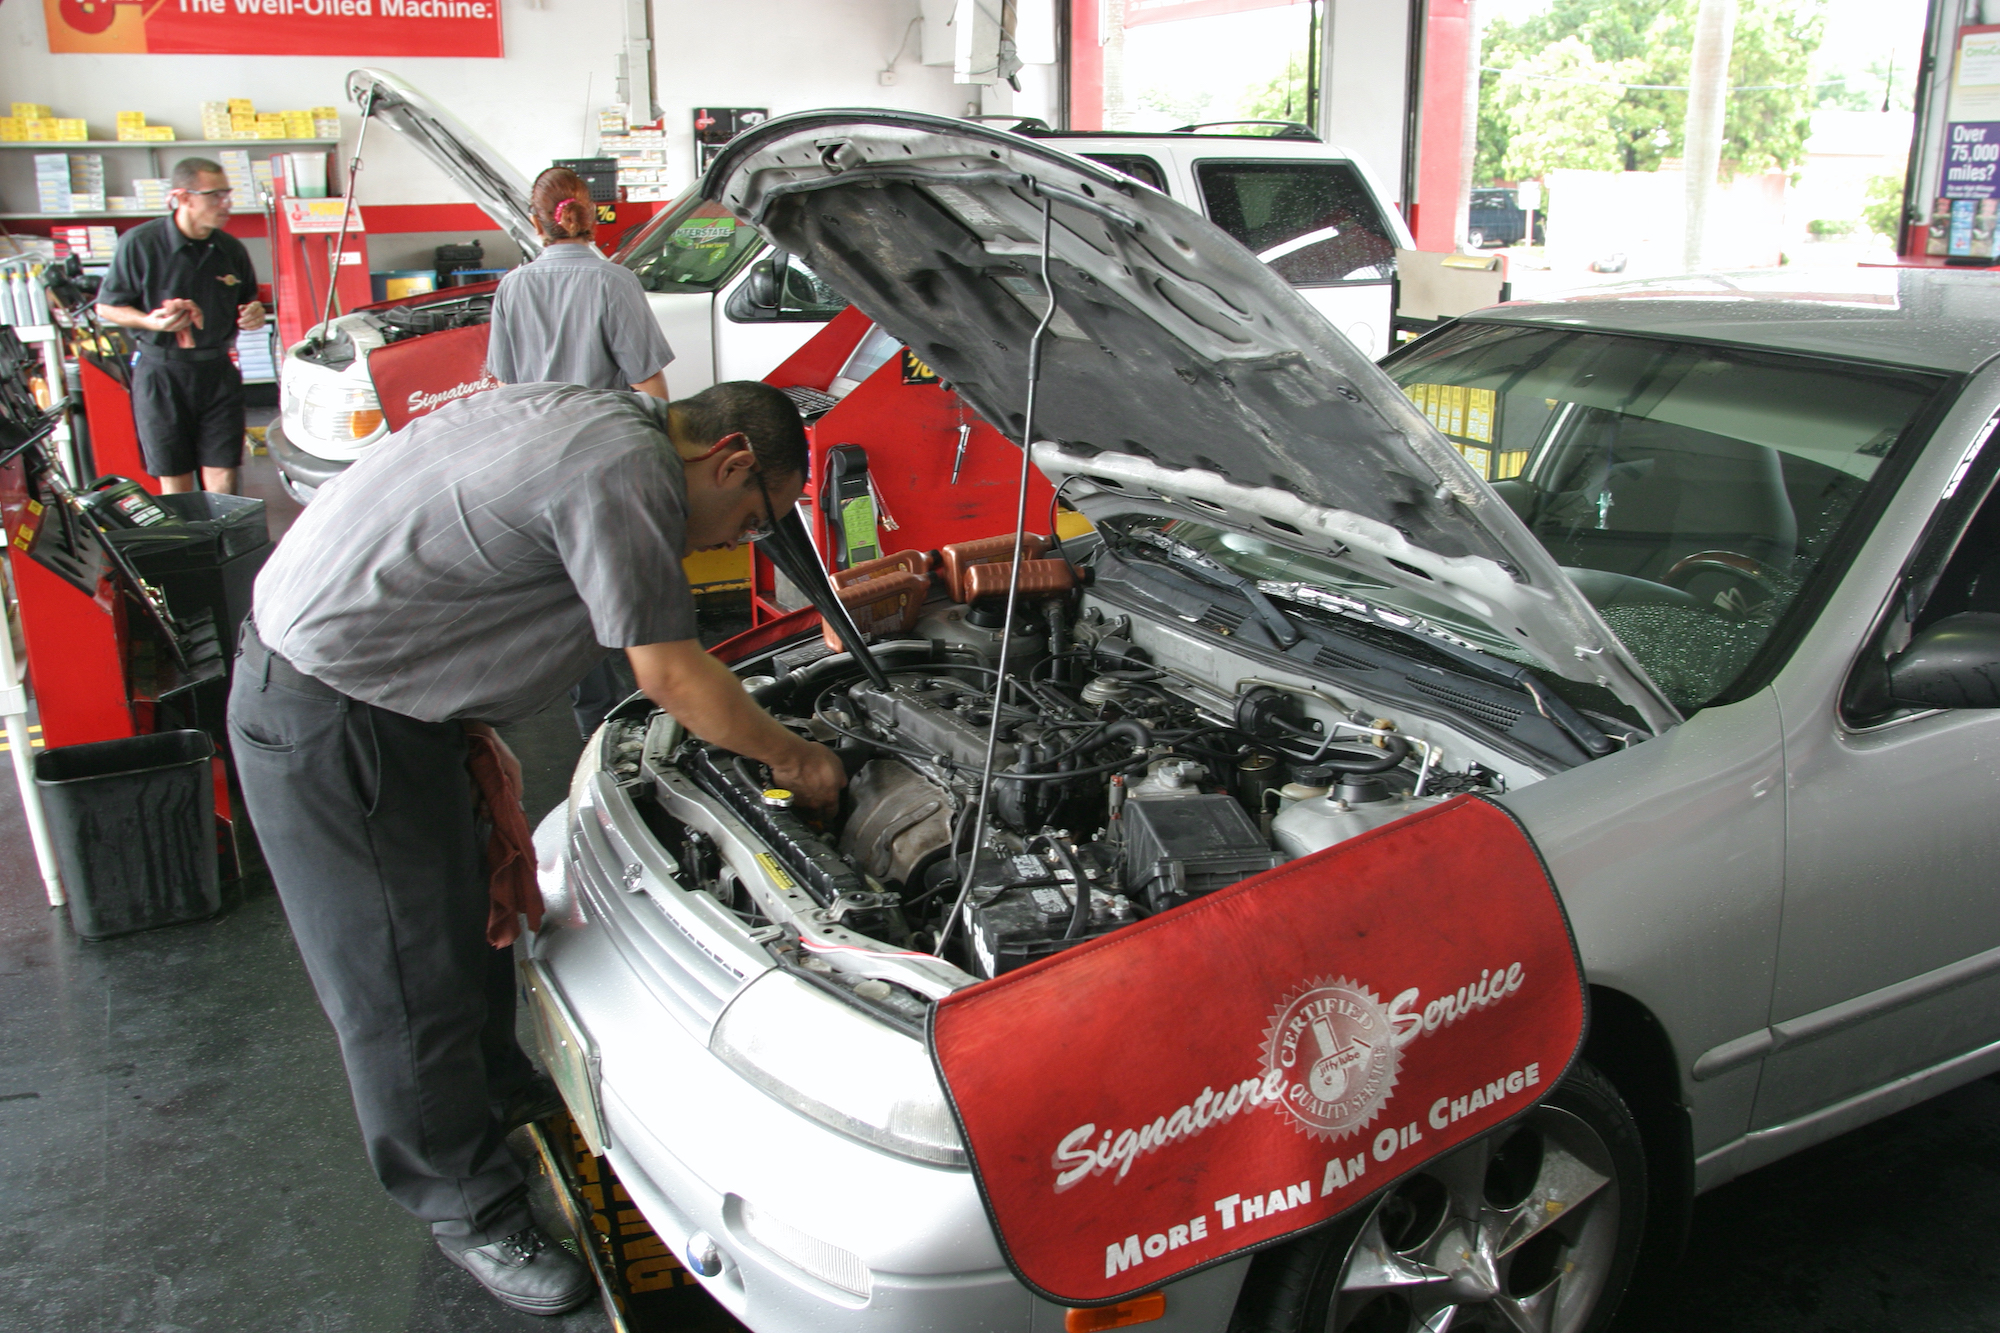 A jiffy lube mechanic changes the oil on a car